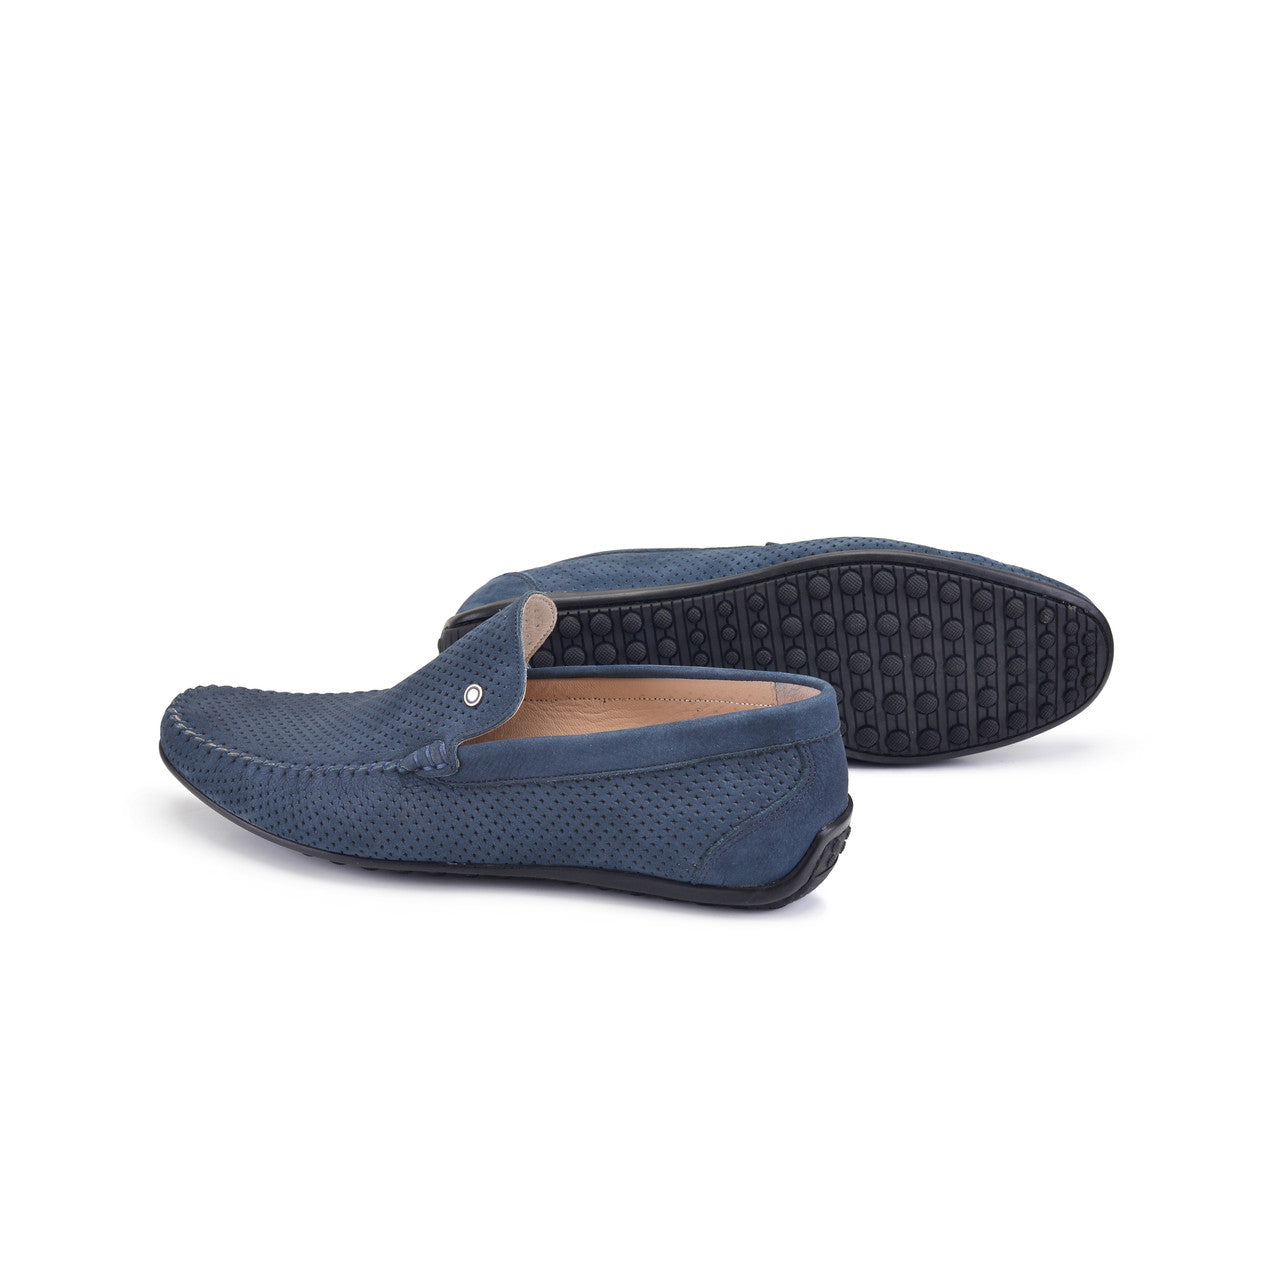 P00026- 2301 -perforated Driving shoe Navy